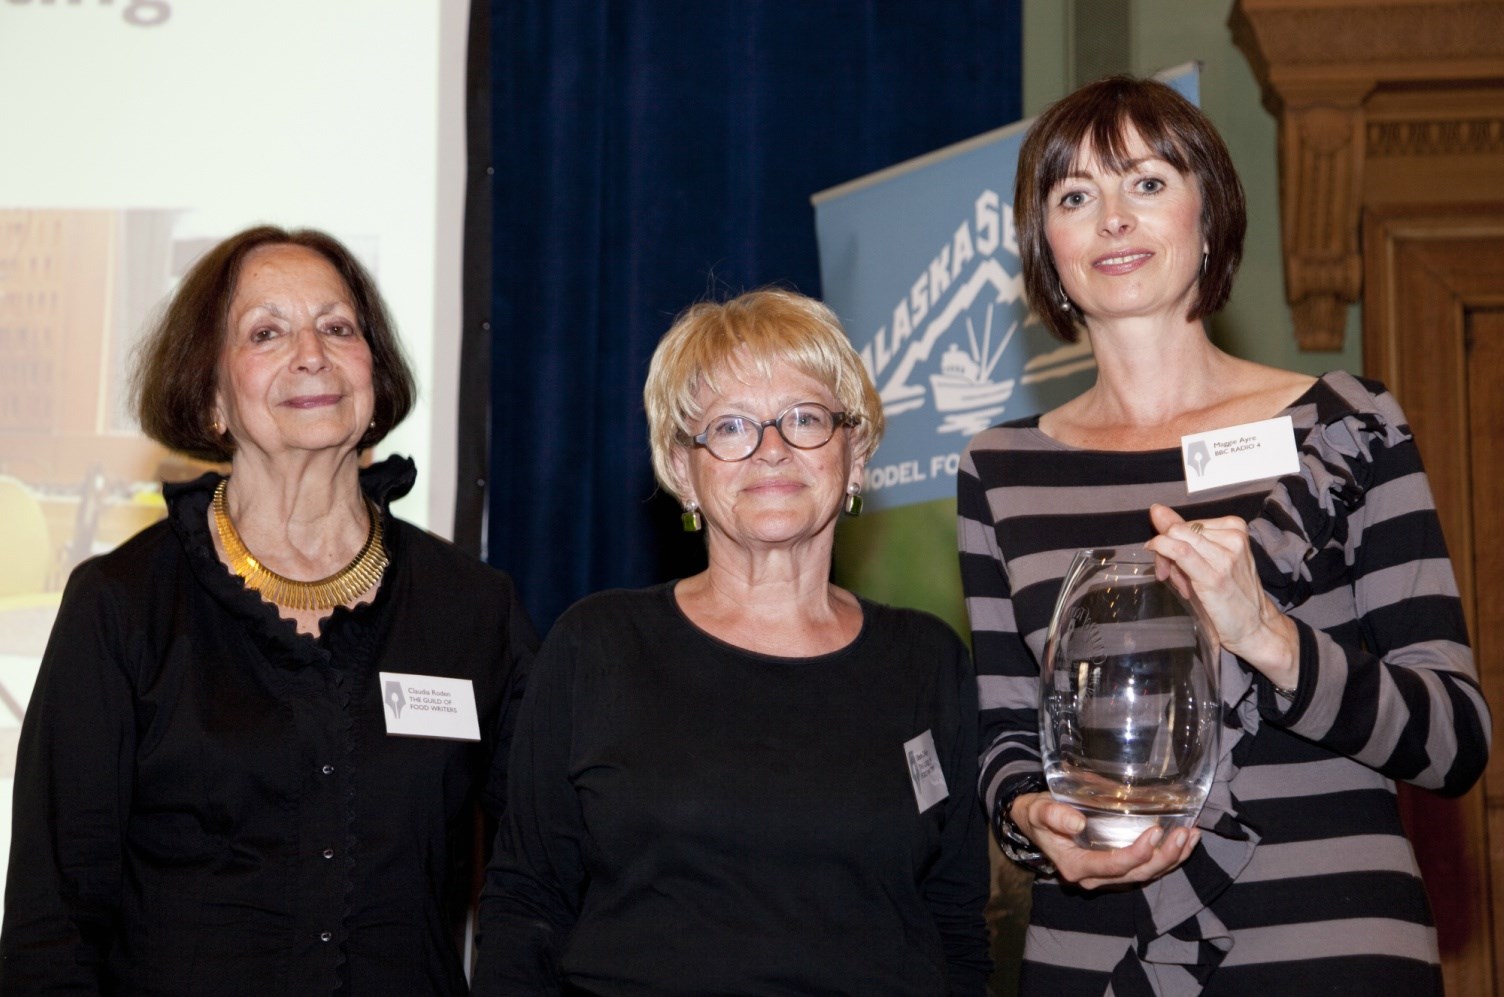 Claudia Roden presenting the Miriam Polunin Award for Work on Healthy Eating to from left to right: Sheila Dillon and Maggie Ayre from BBC Radio 4's The Food Programme